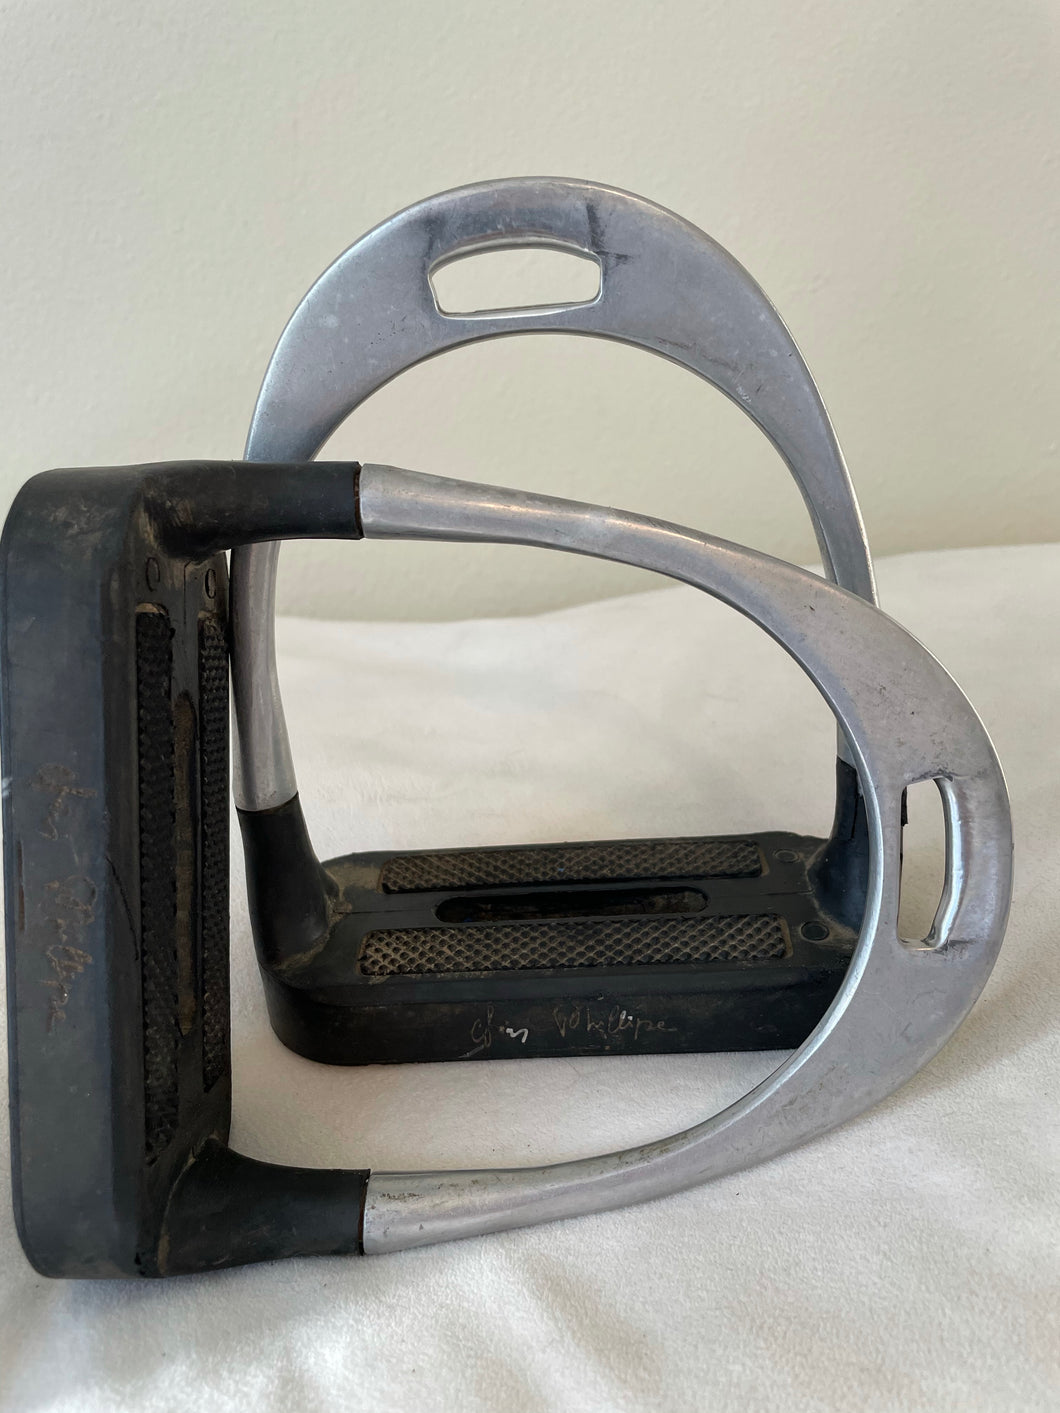 Stirrups metal with rubber overlay 4.75” (Light weight)- Nice Design